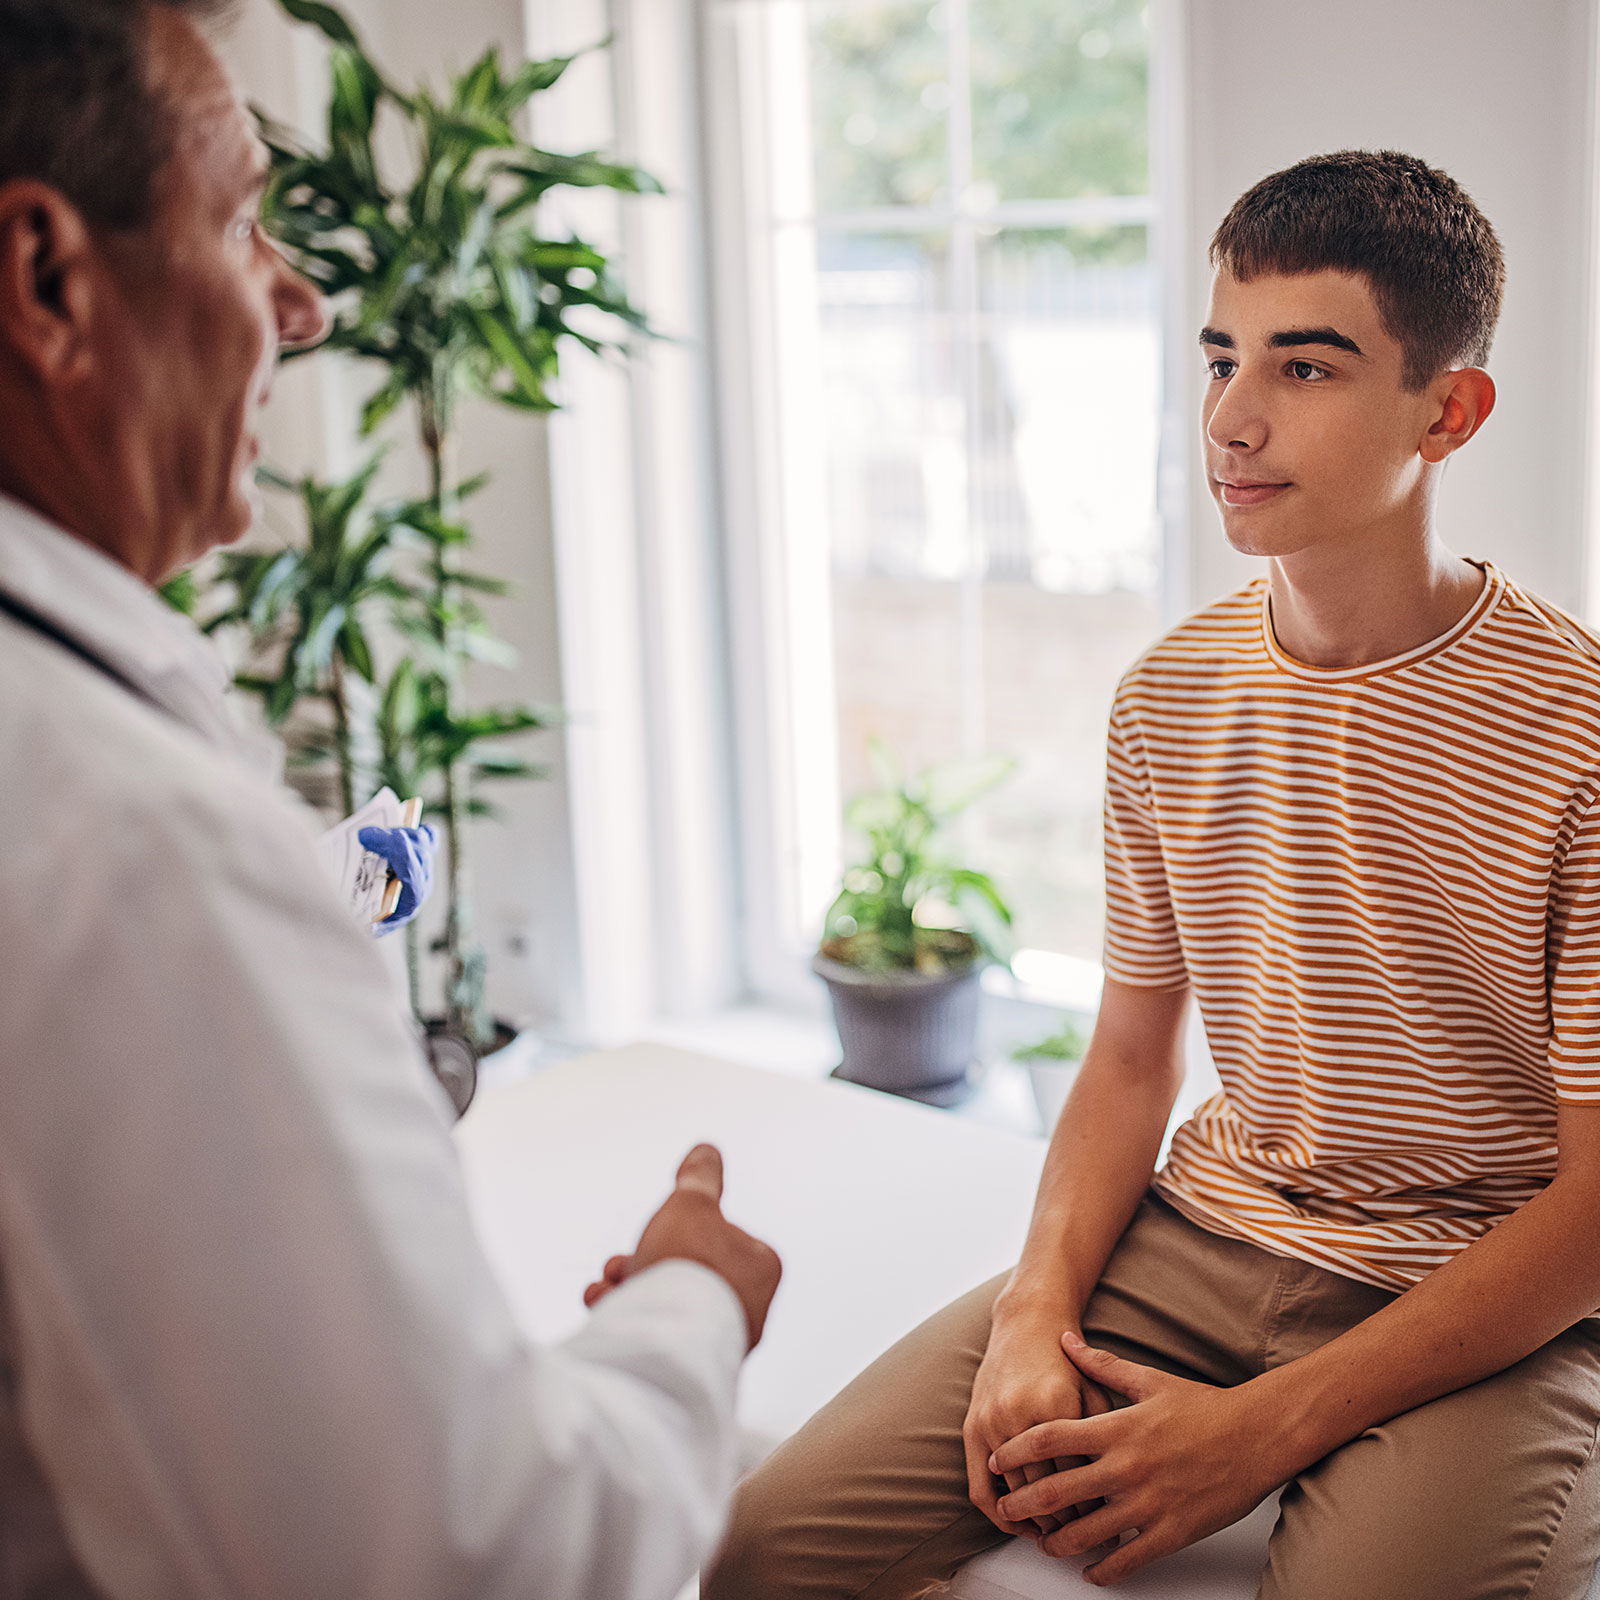 Doctor speaking to young male patient in exam room